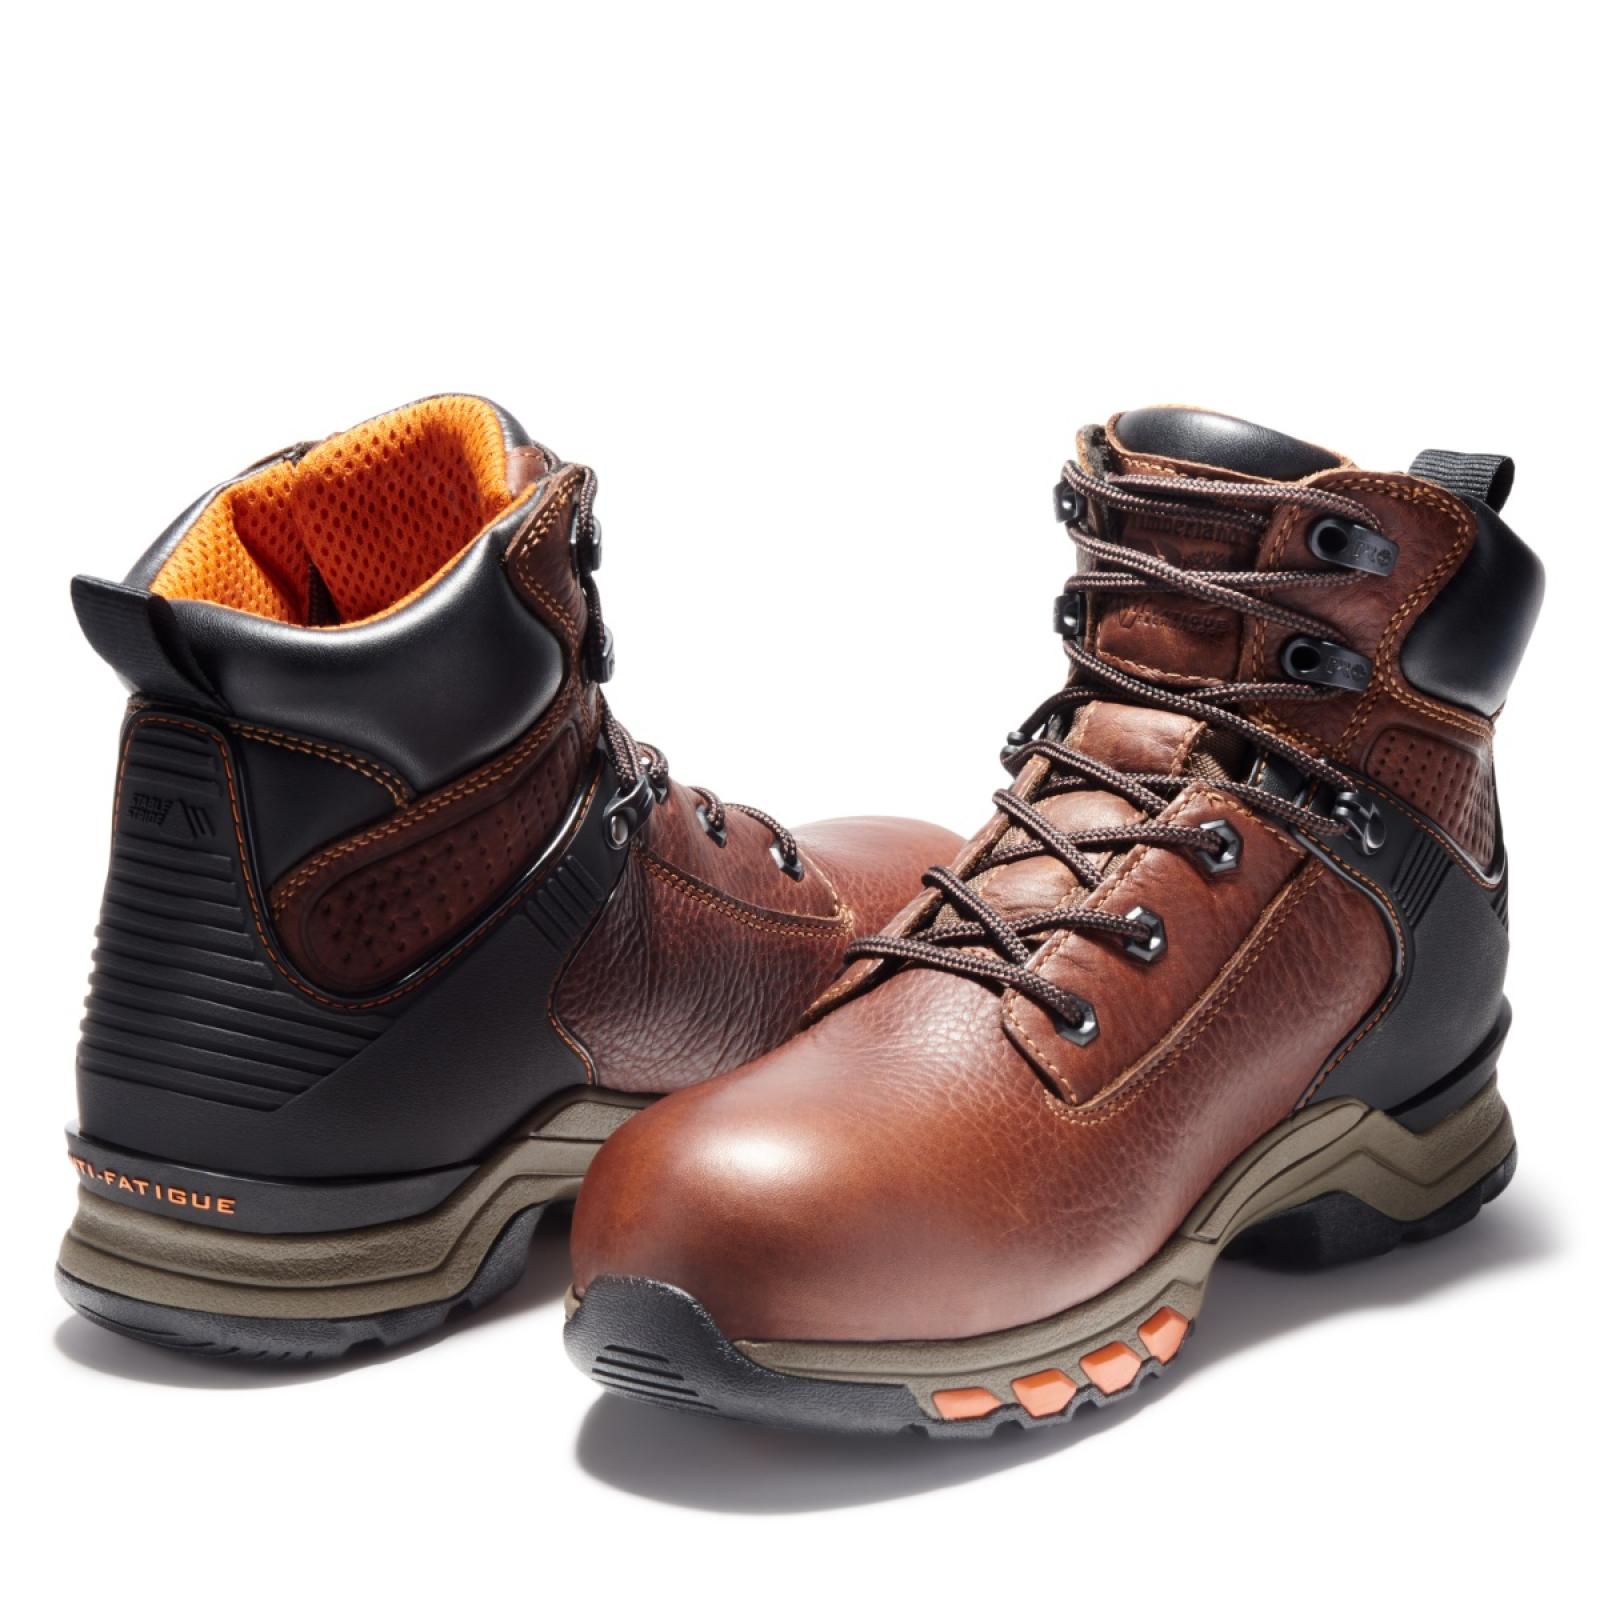 Timberland PRO Men's Hypercharge 6" Composite Toe Work Boots